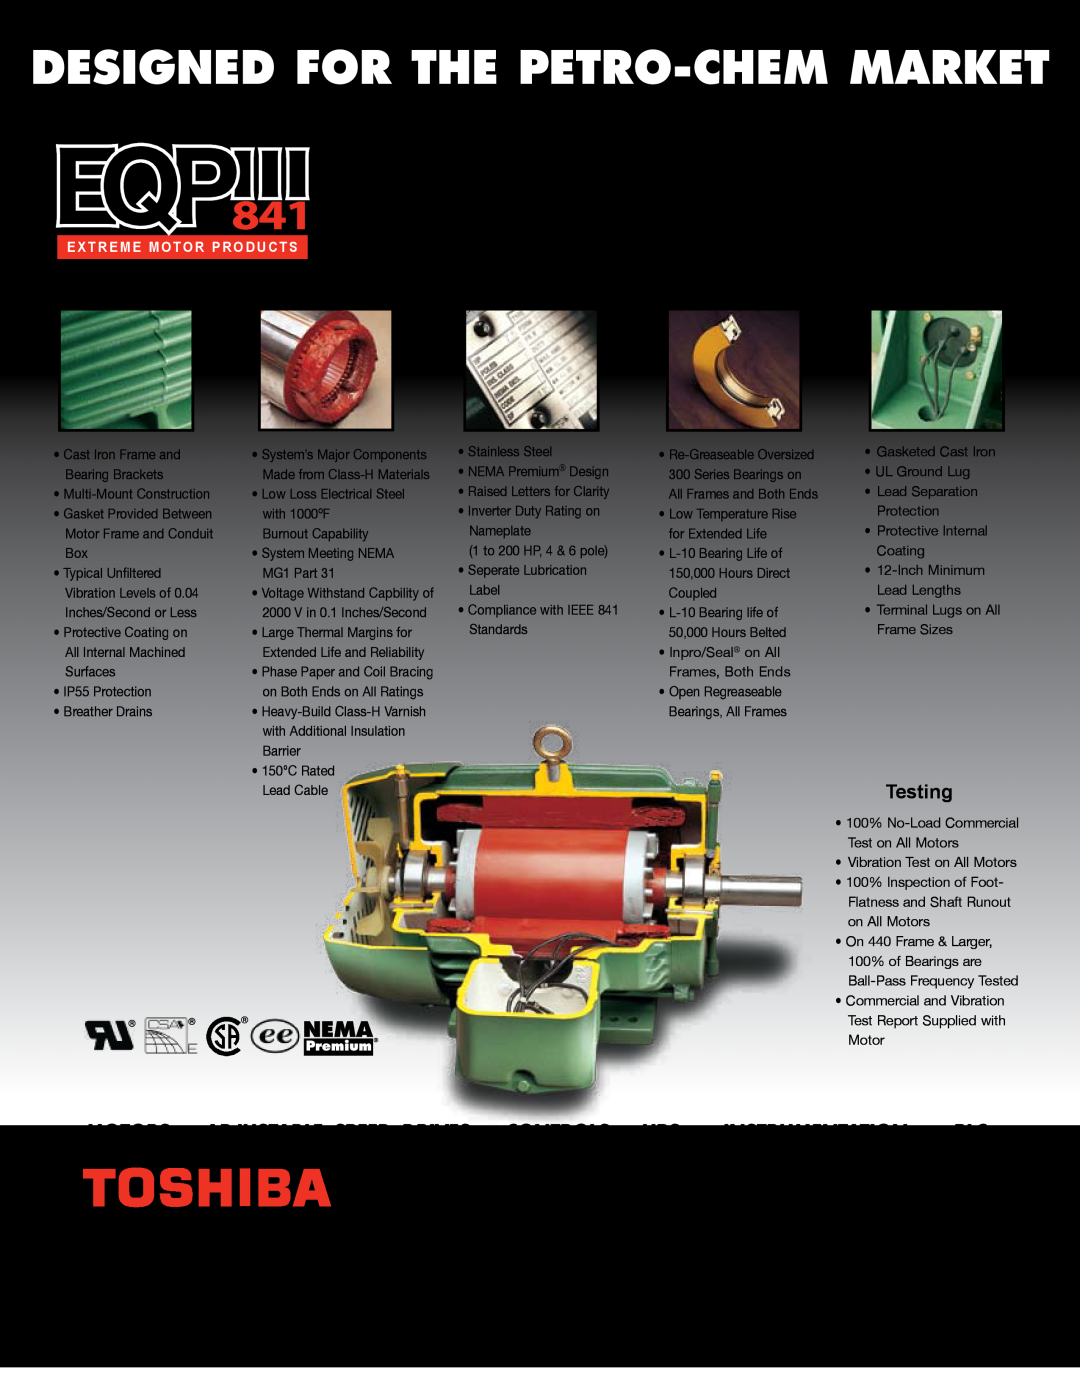 Toshiba EQPIII-841 Designed for the PEtro-Chem Market, LVMEQP3841080210, Available Through, Construction, Nameplate 